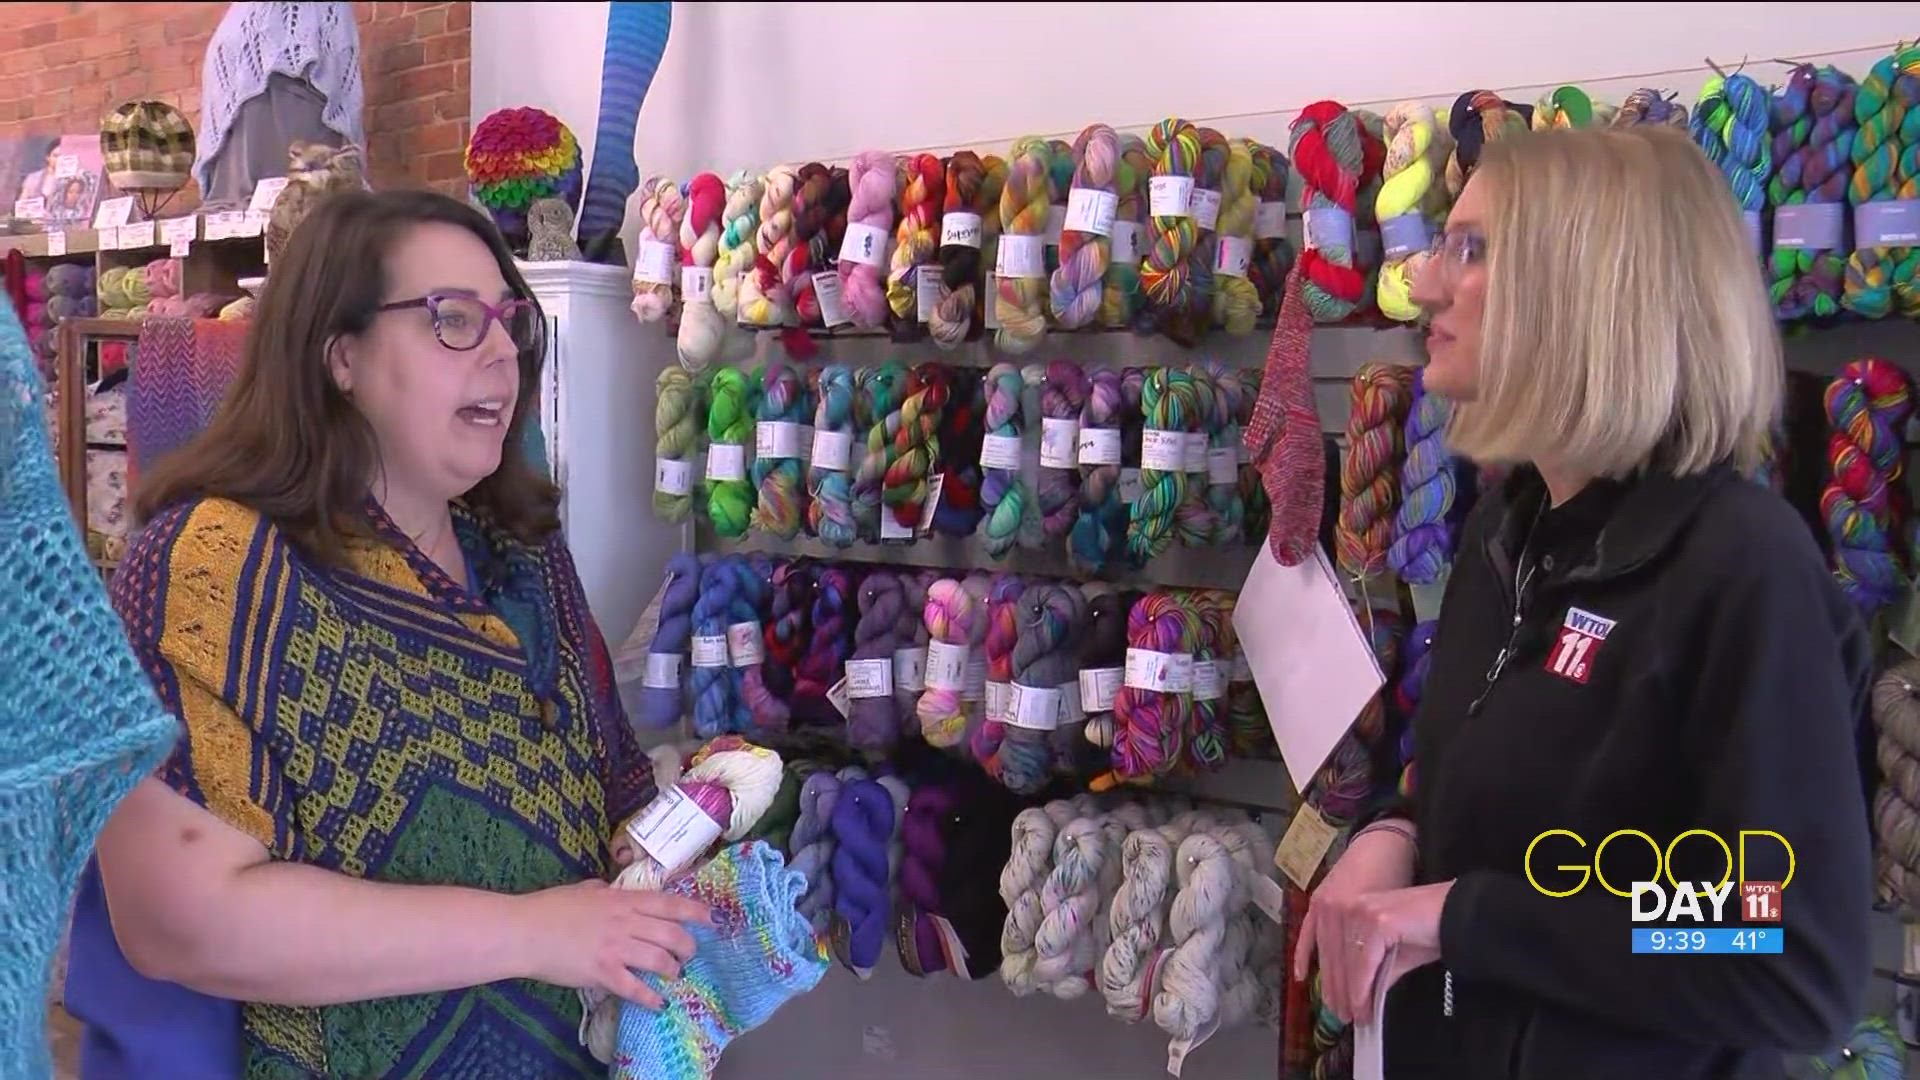 Diane visits the Tink & the Frog downtown Adrian, a knitting shop celebrating one year in business with some exciting festivities.